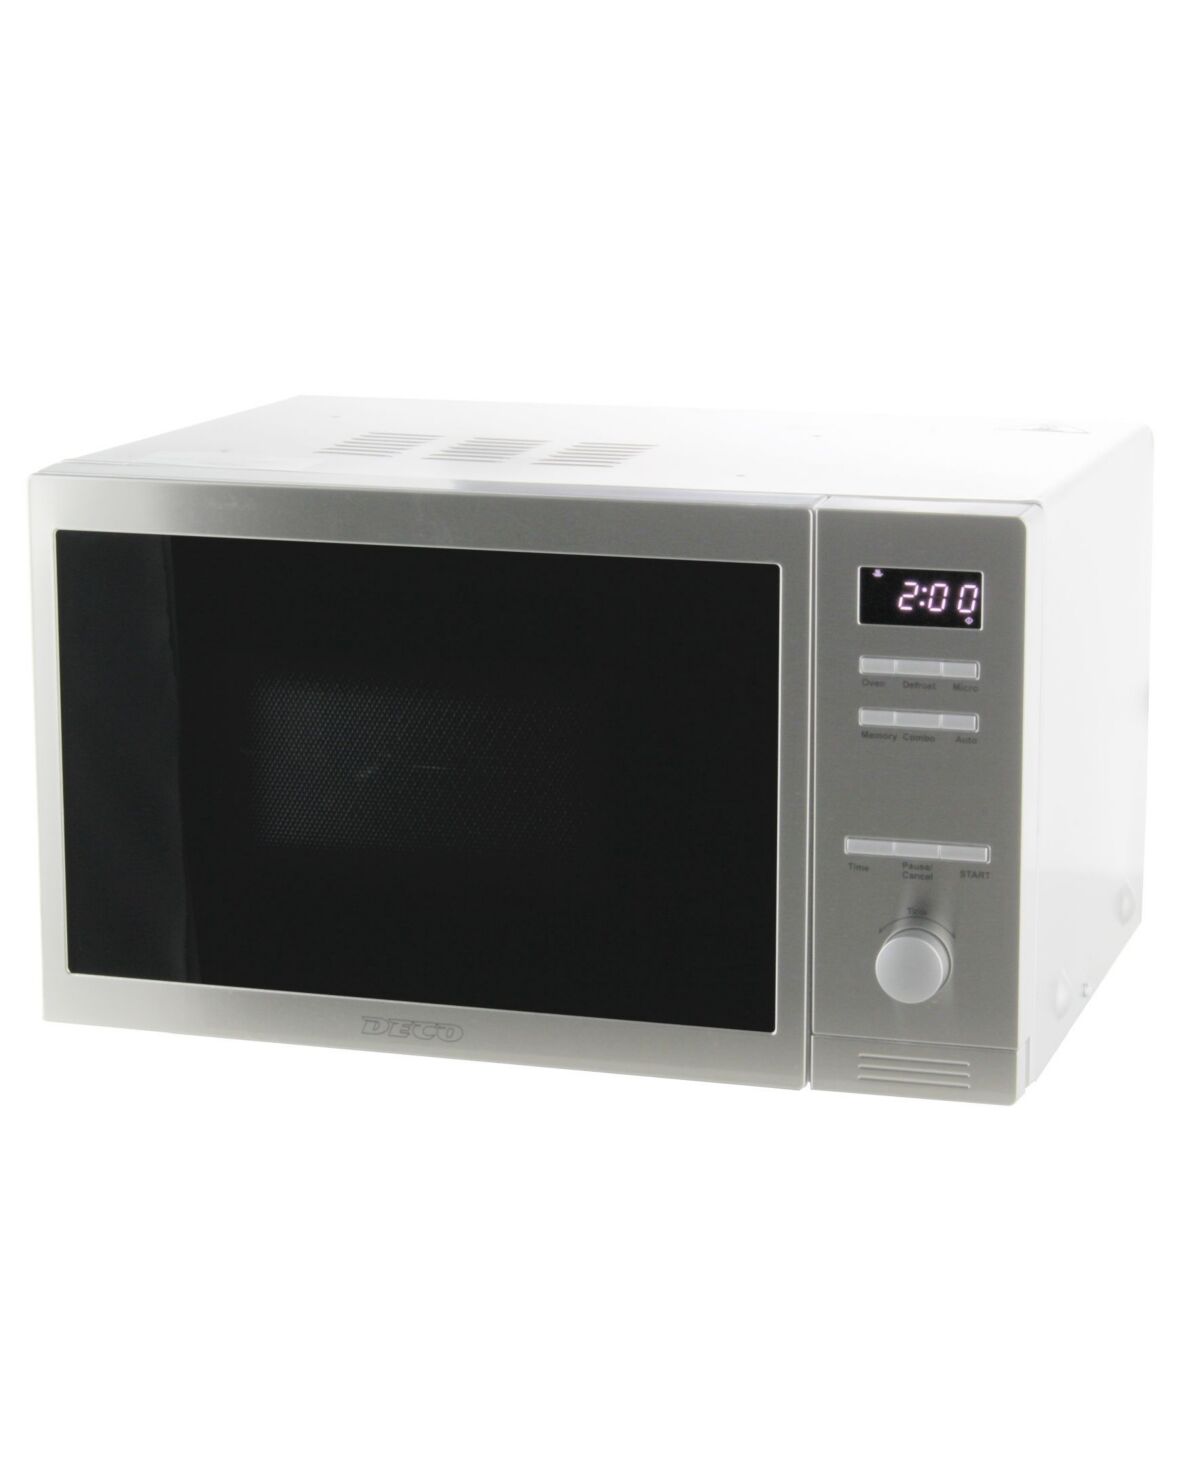 Equator 0.8 Cubic Feet Countertop Combo Microwave Oven with Auto Cook and Memory Function. - Silver